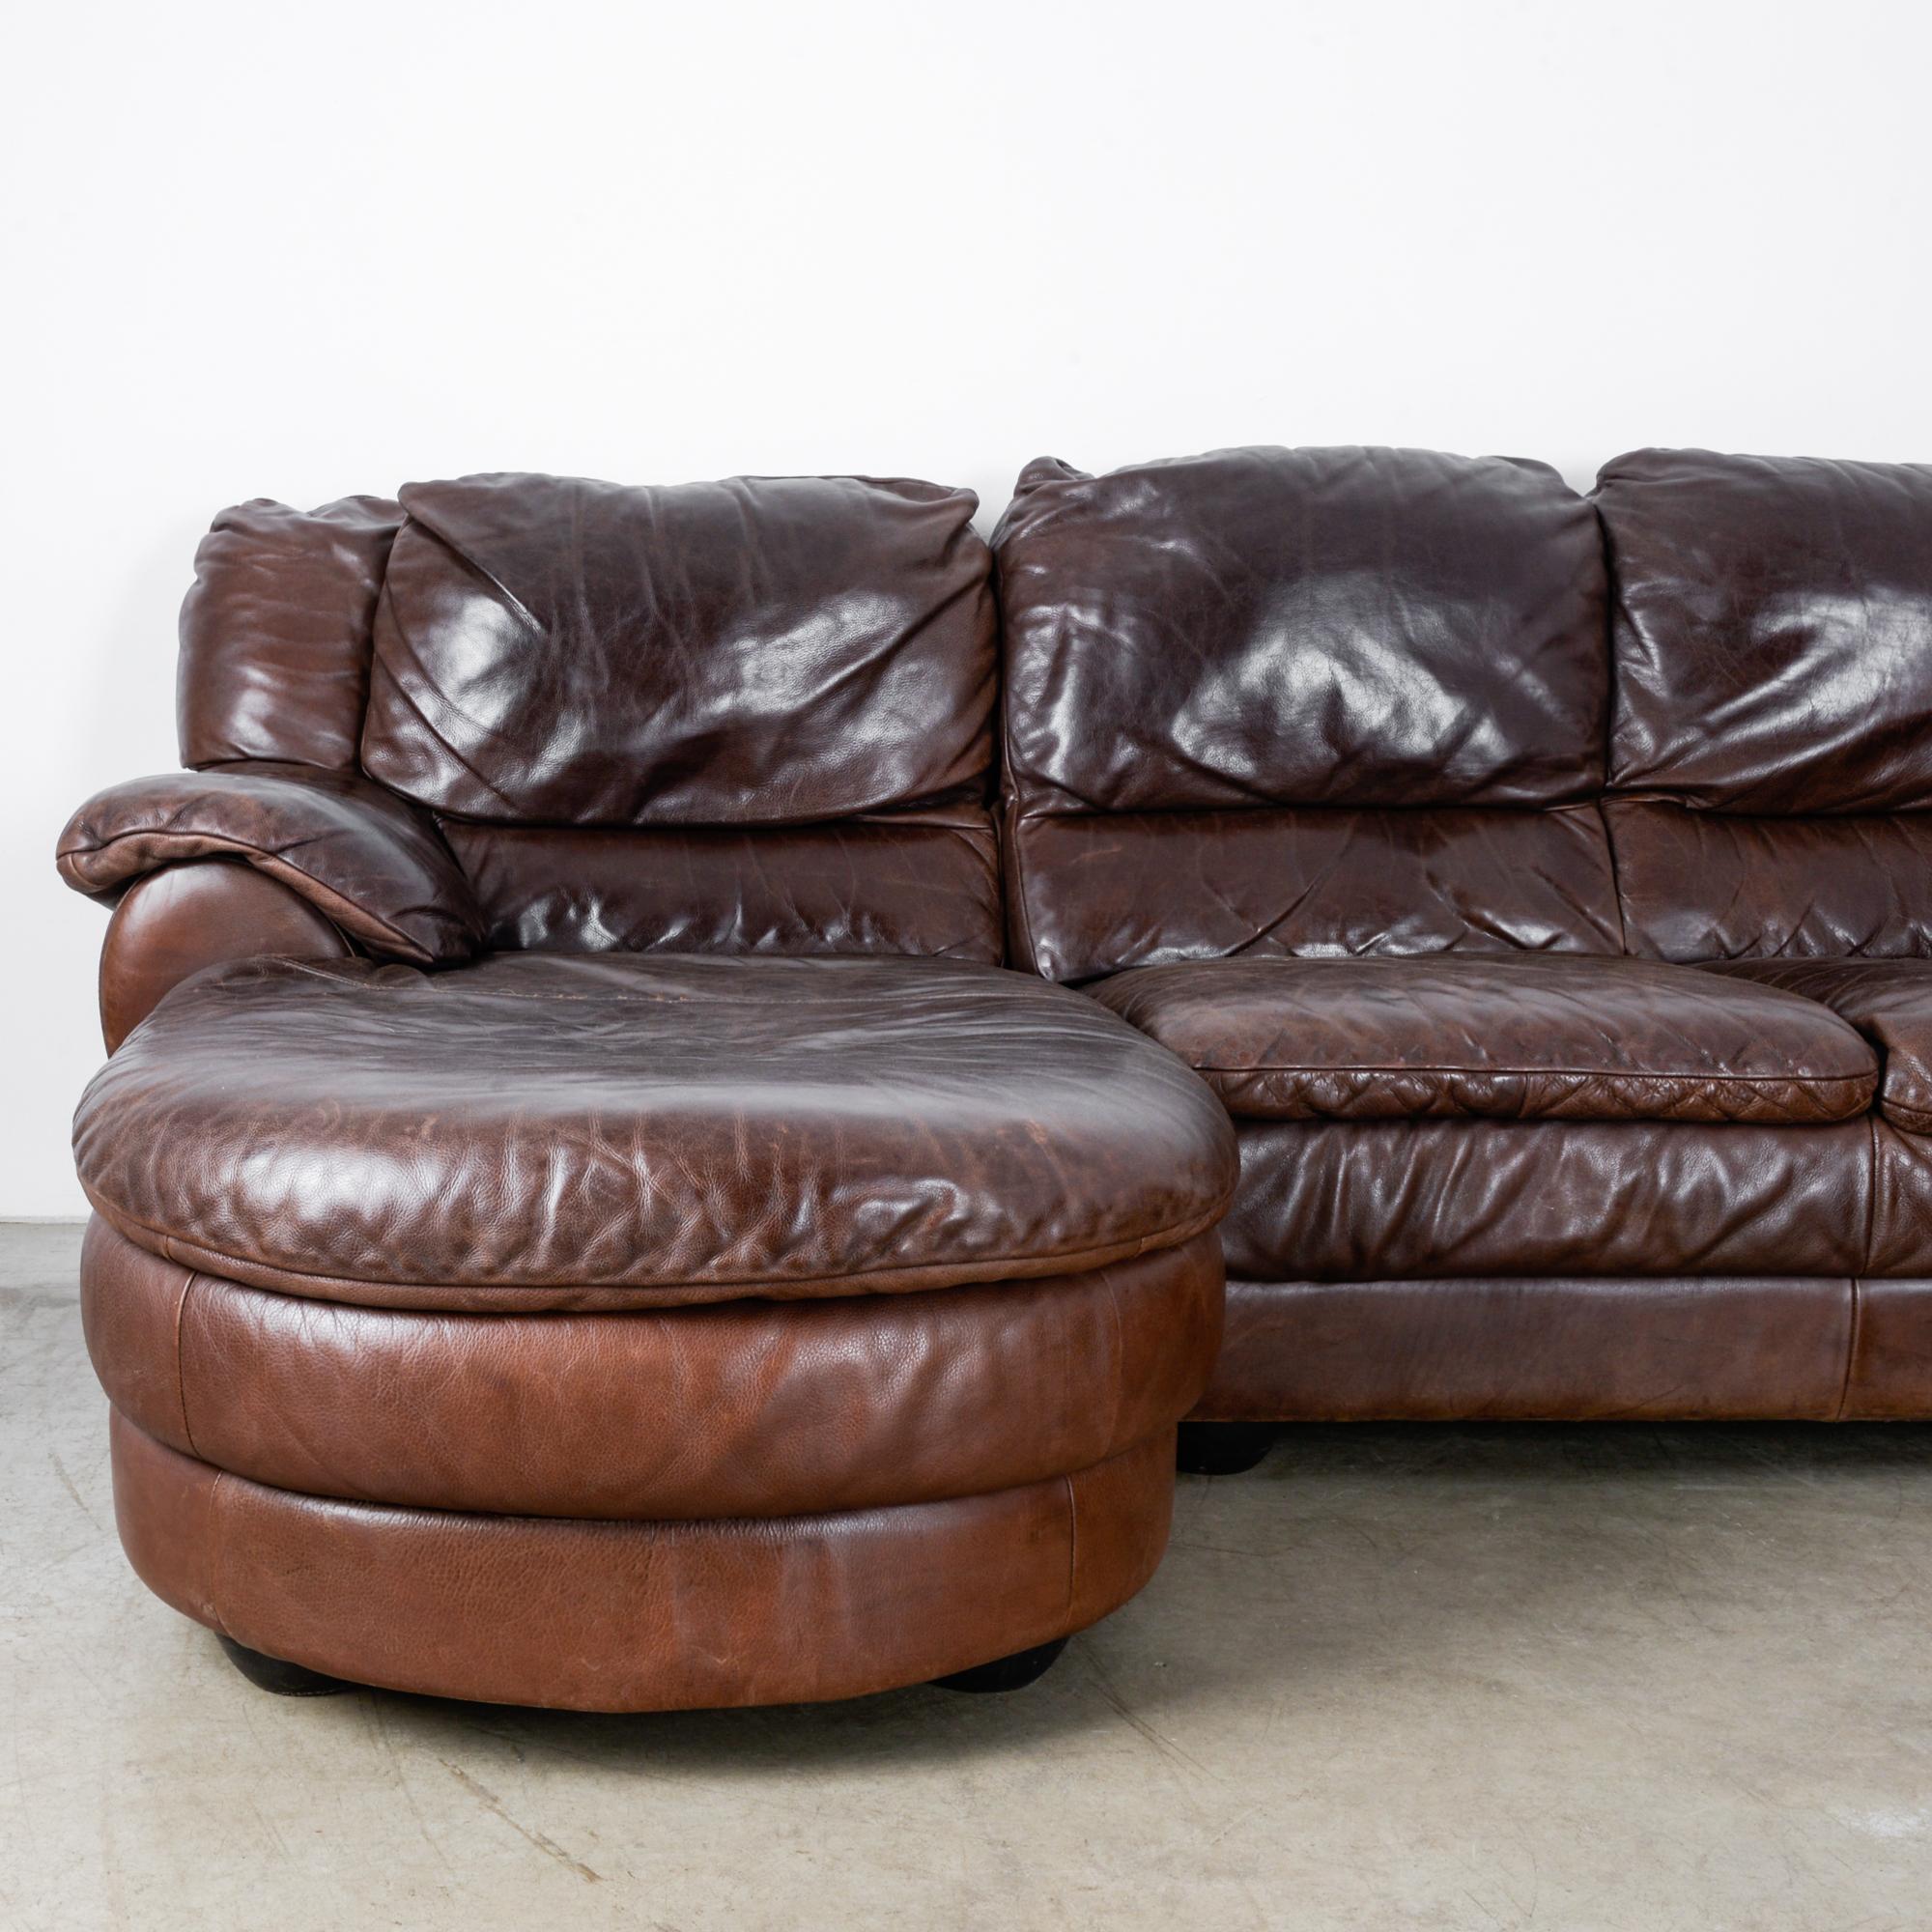 vintage leather sectional sofa